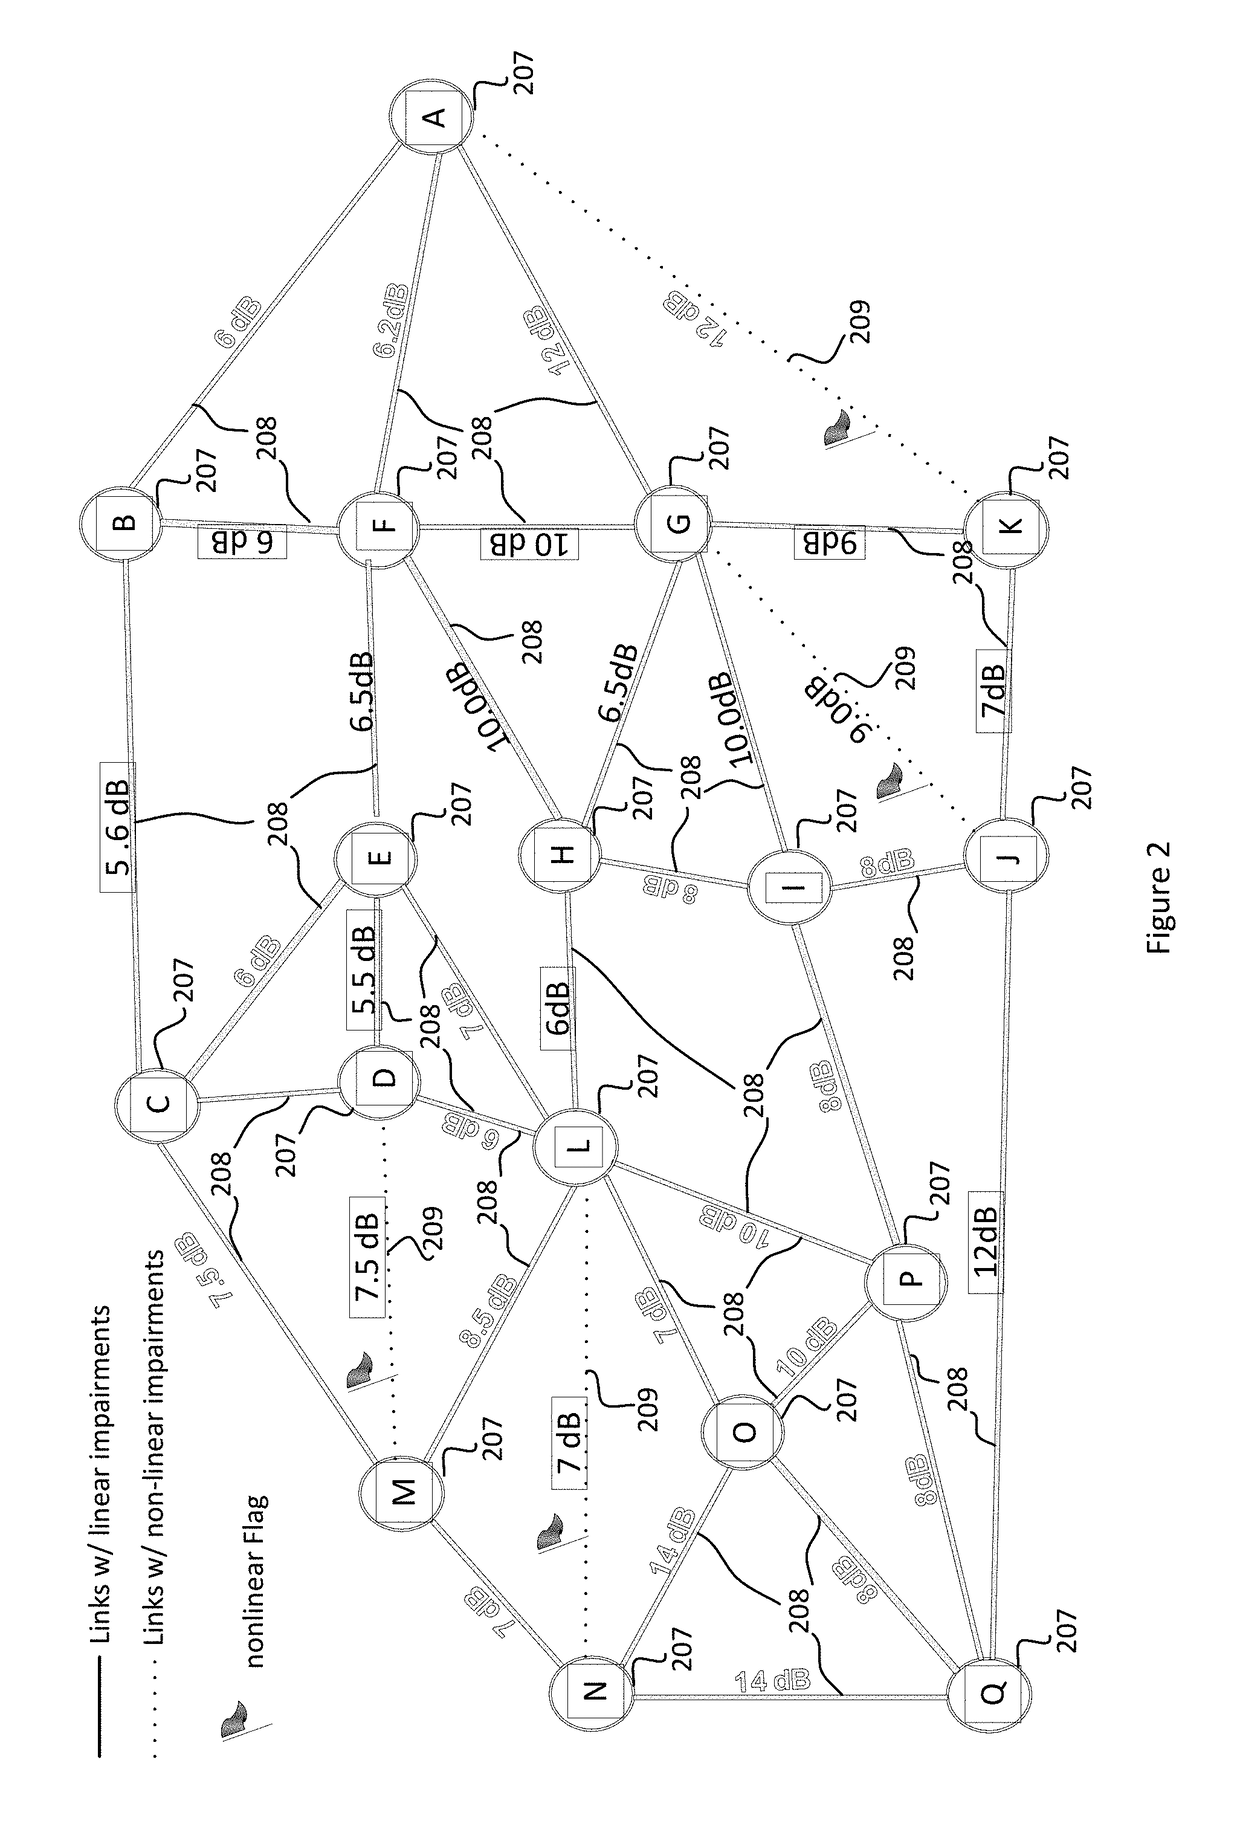 System and method for communication network service connectivity